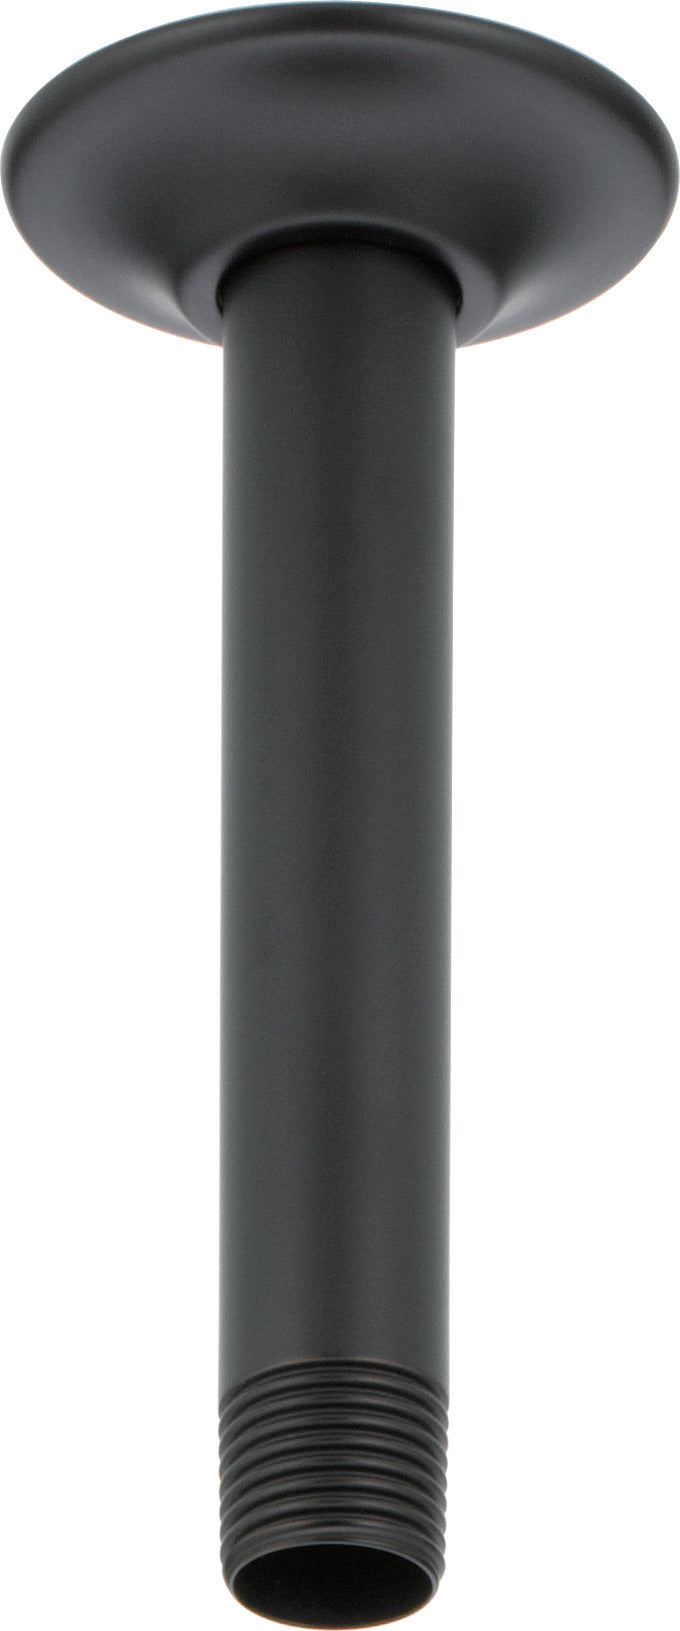 RP48985BL product image.